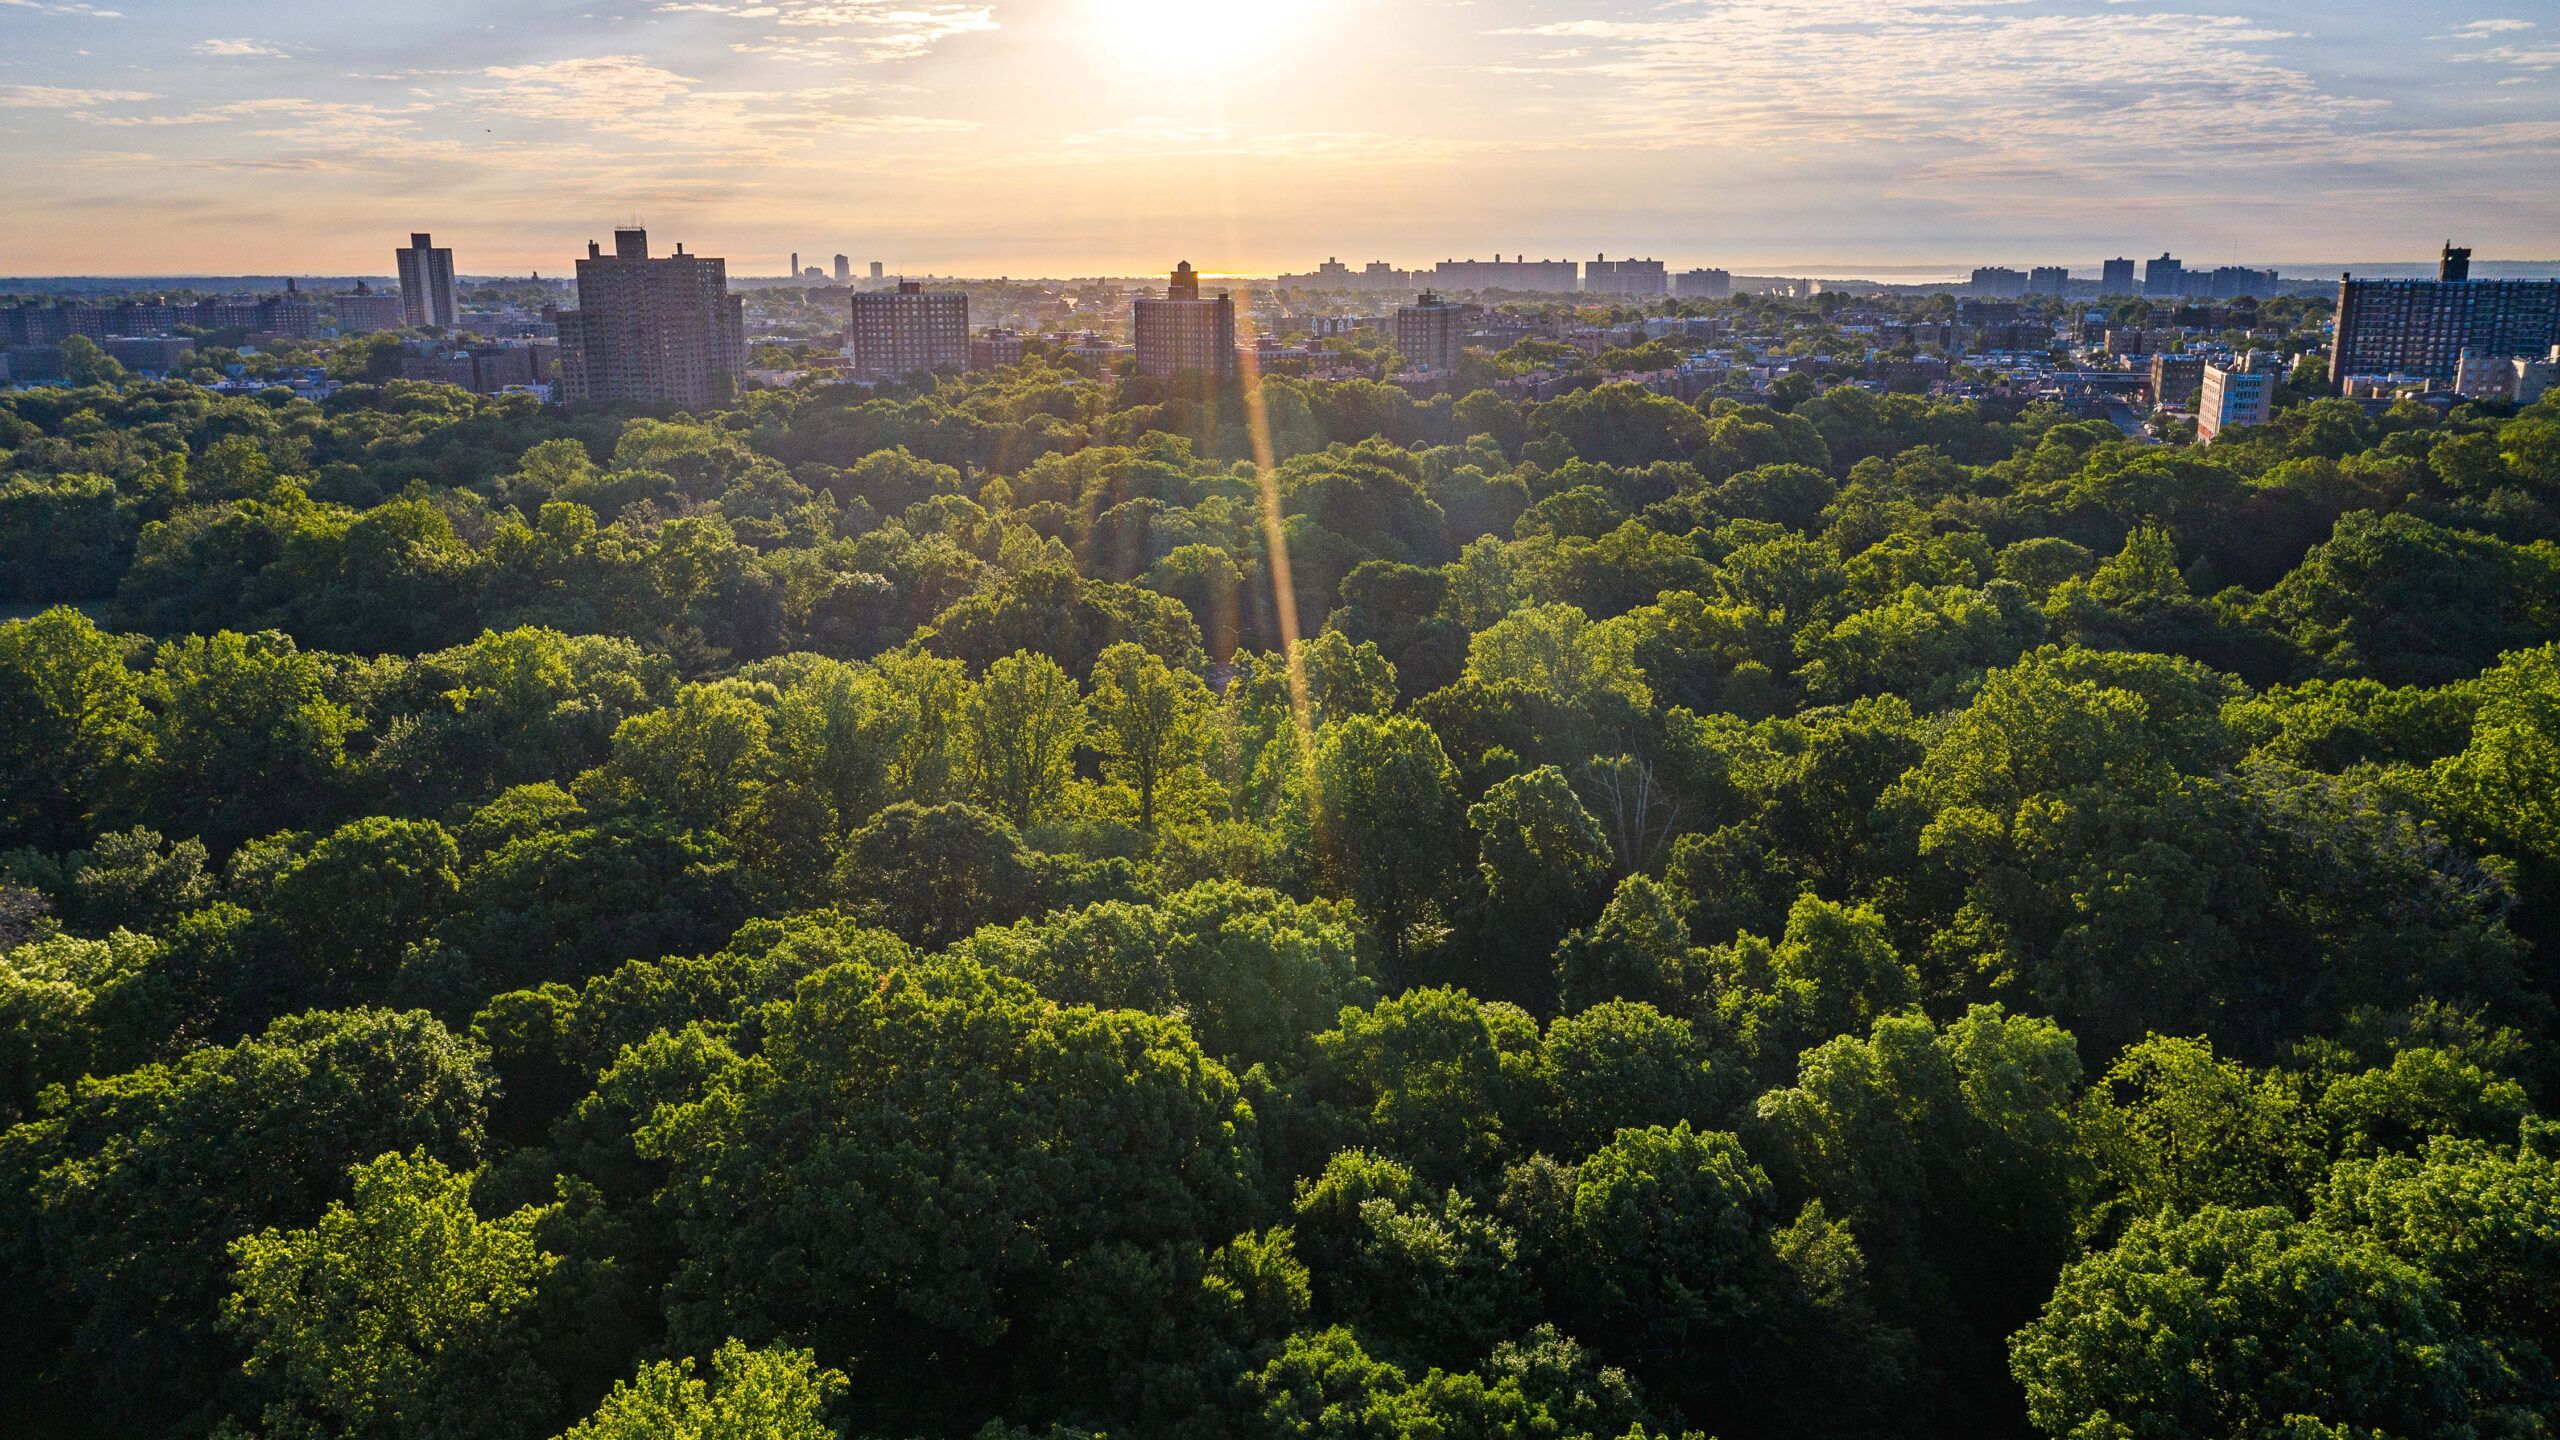 An aerial view of a lush green forest, with a city skyline visible in the distance